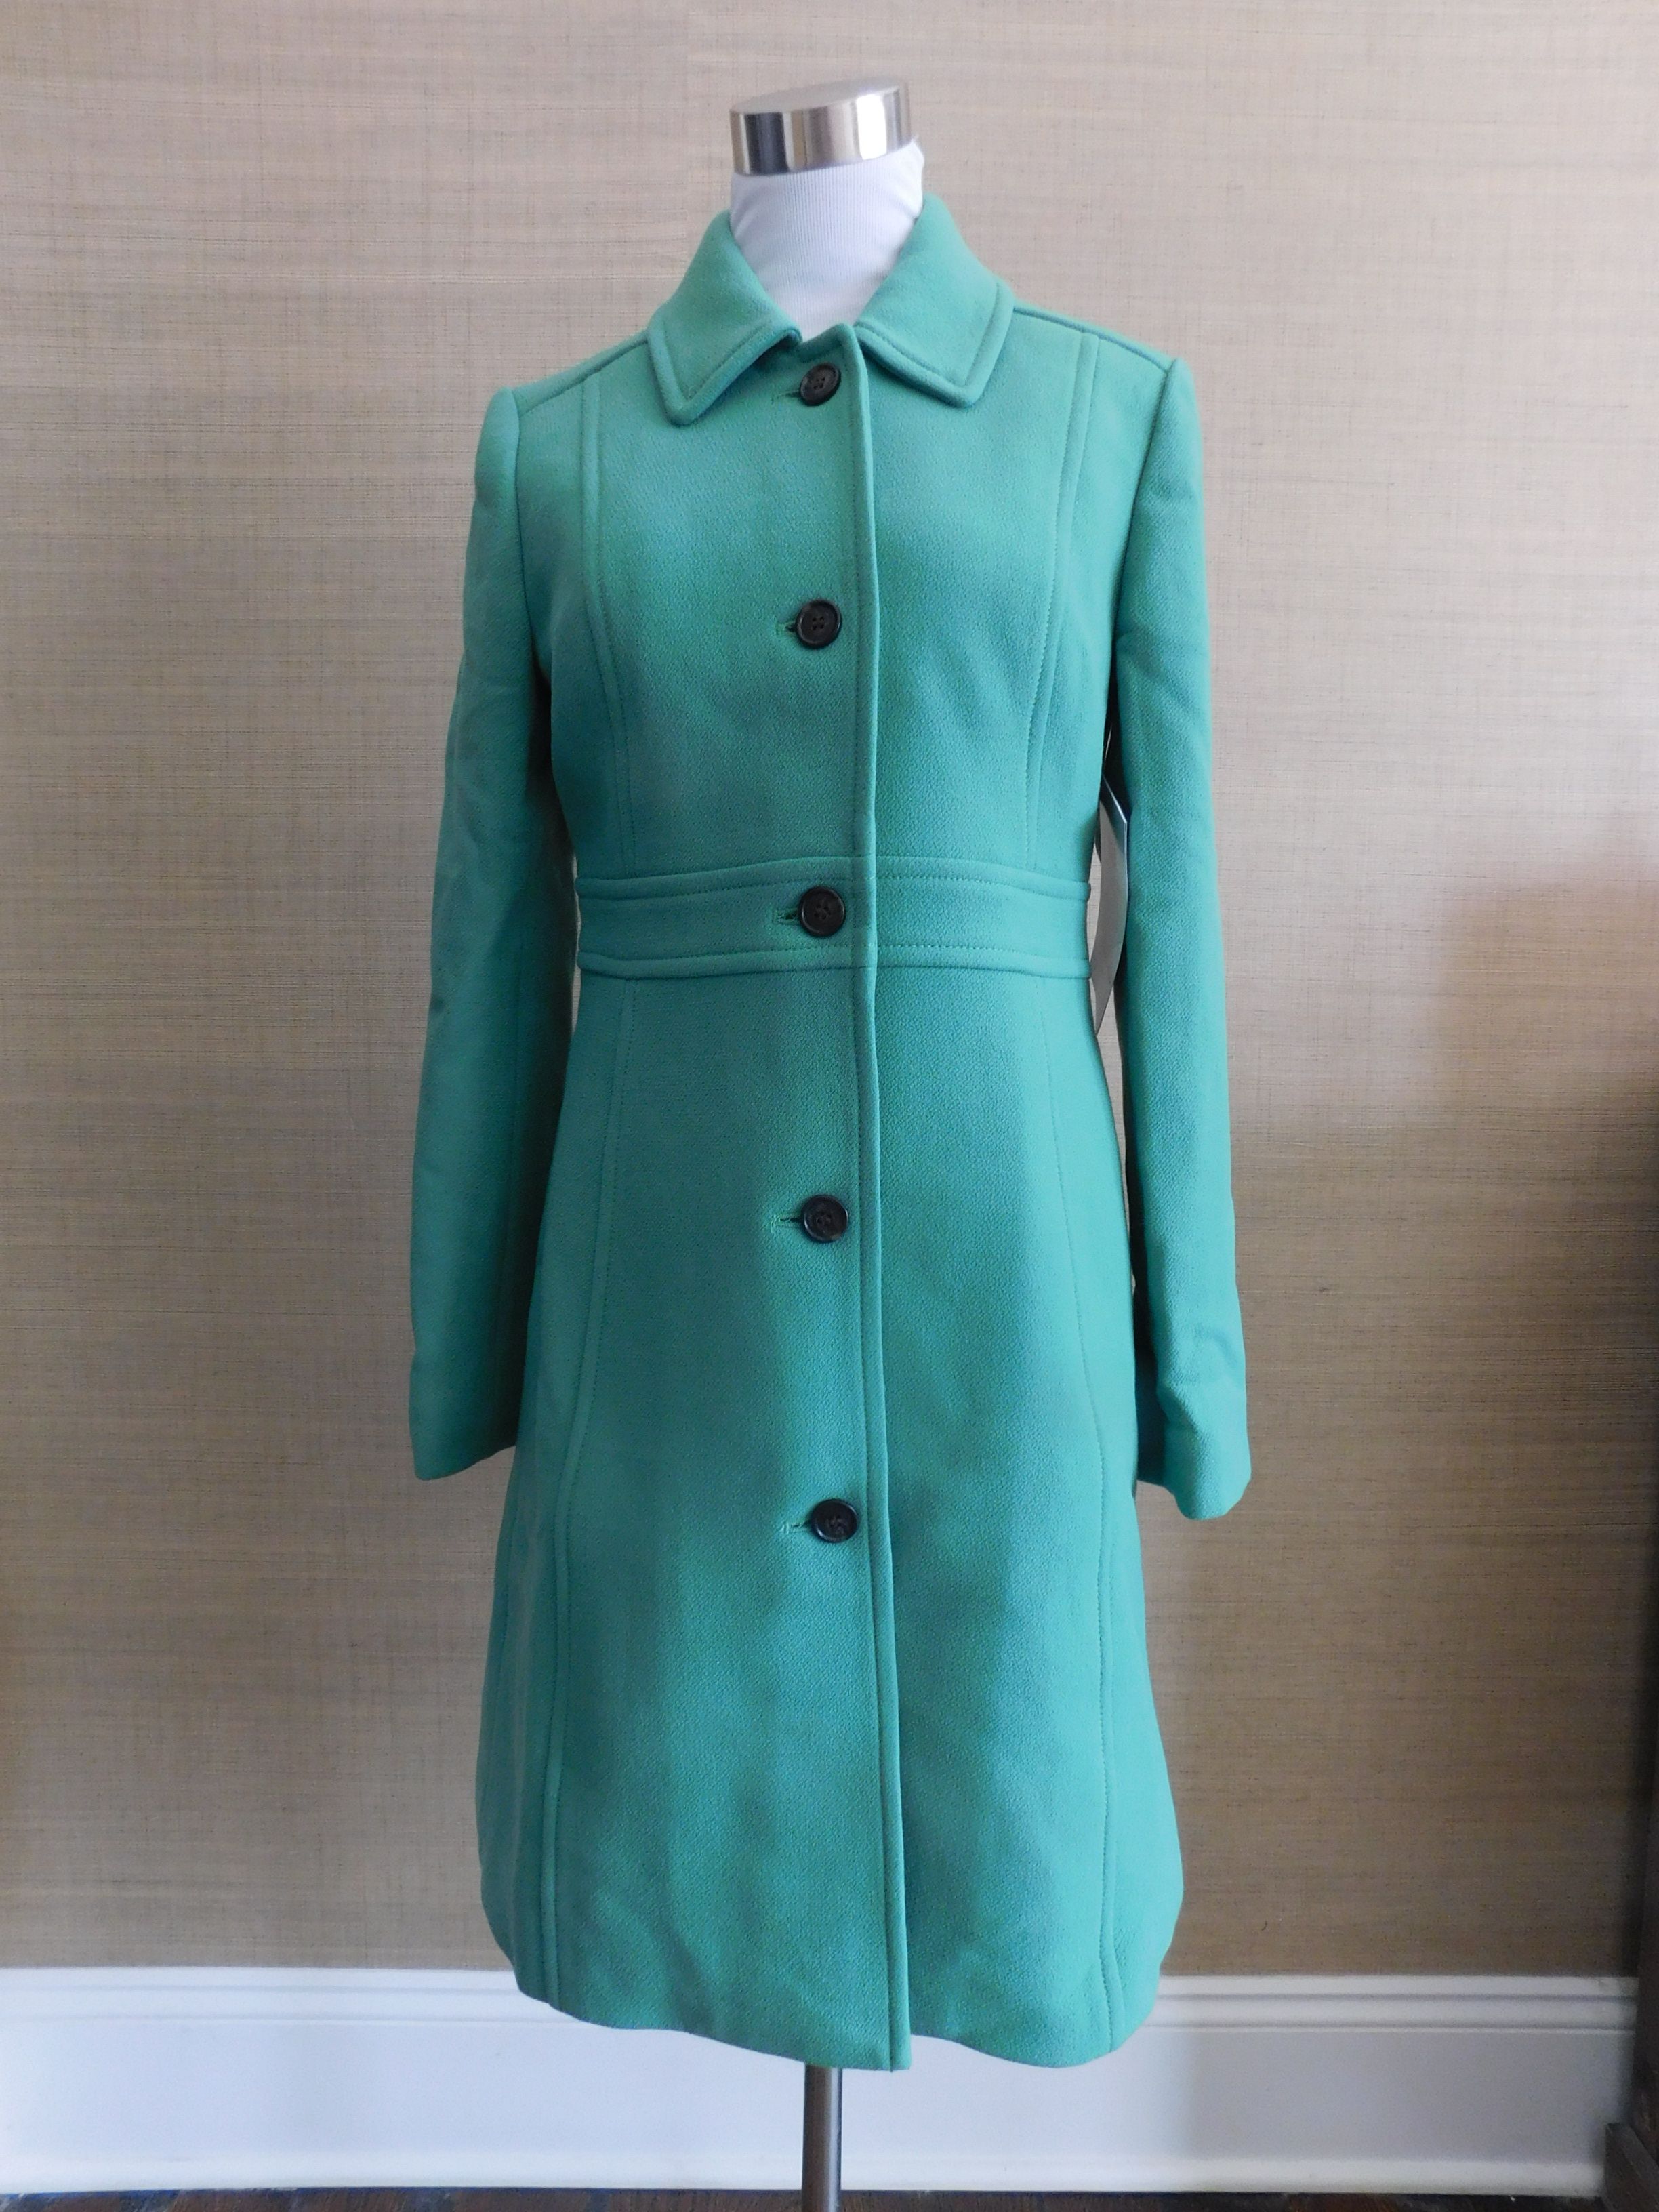 J.Crew $375 Double-Cloth Wool Lady Day Coat w/ Thinsulate 4 fresh grass